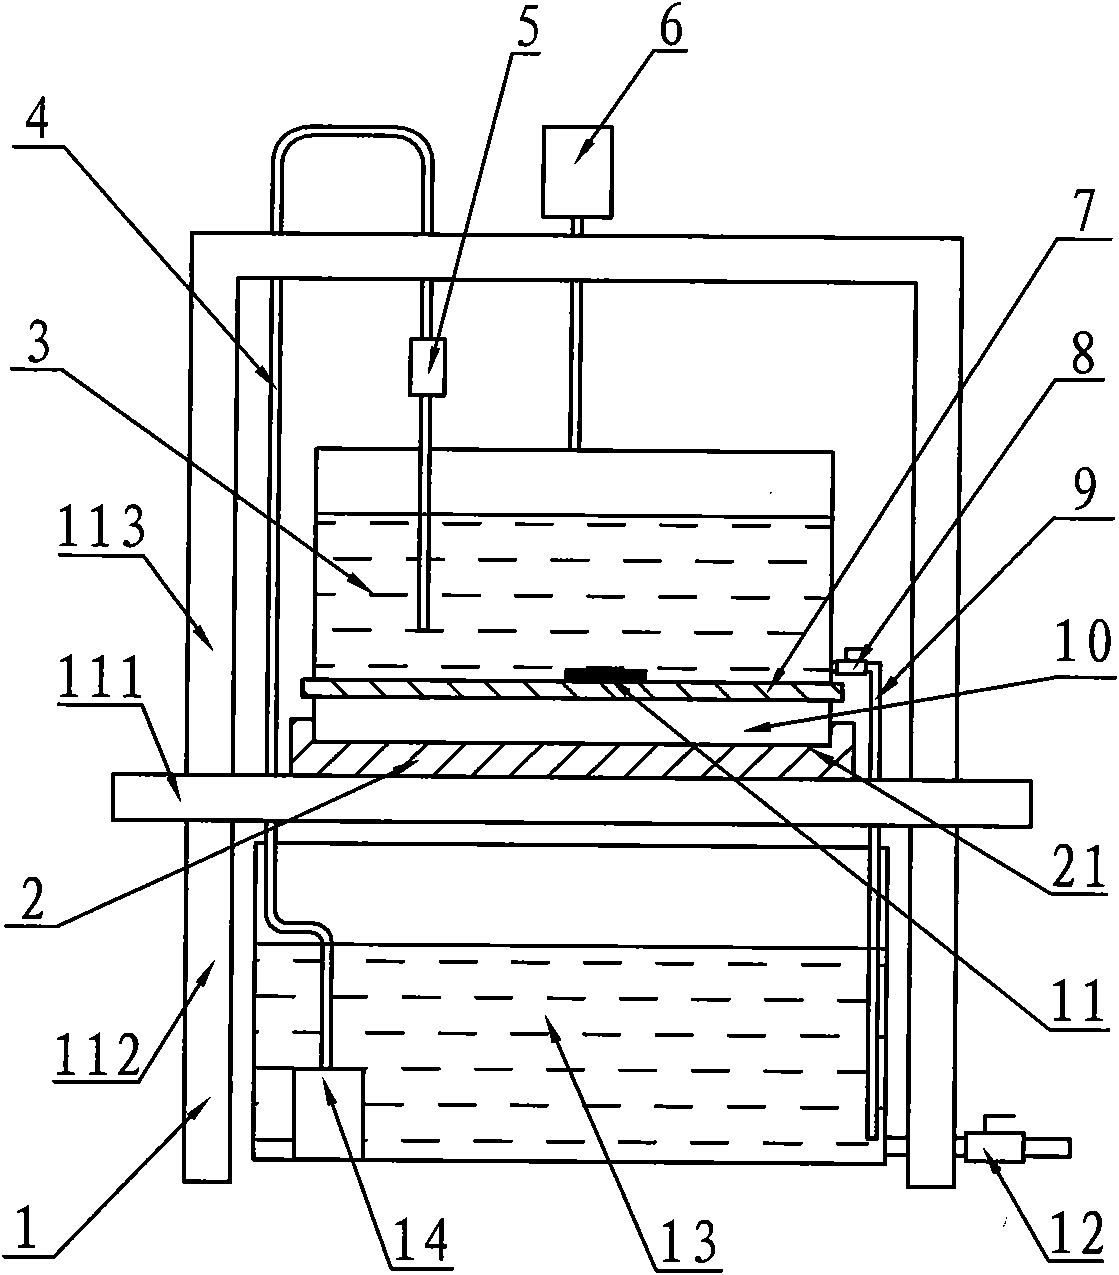 Static pressure testing device of solar cell assembly